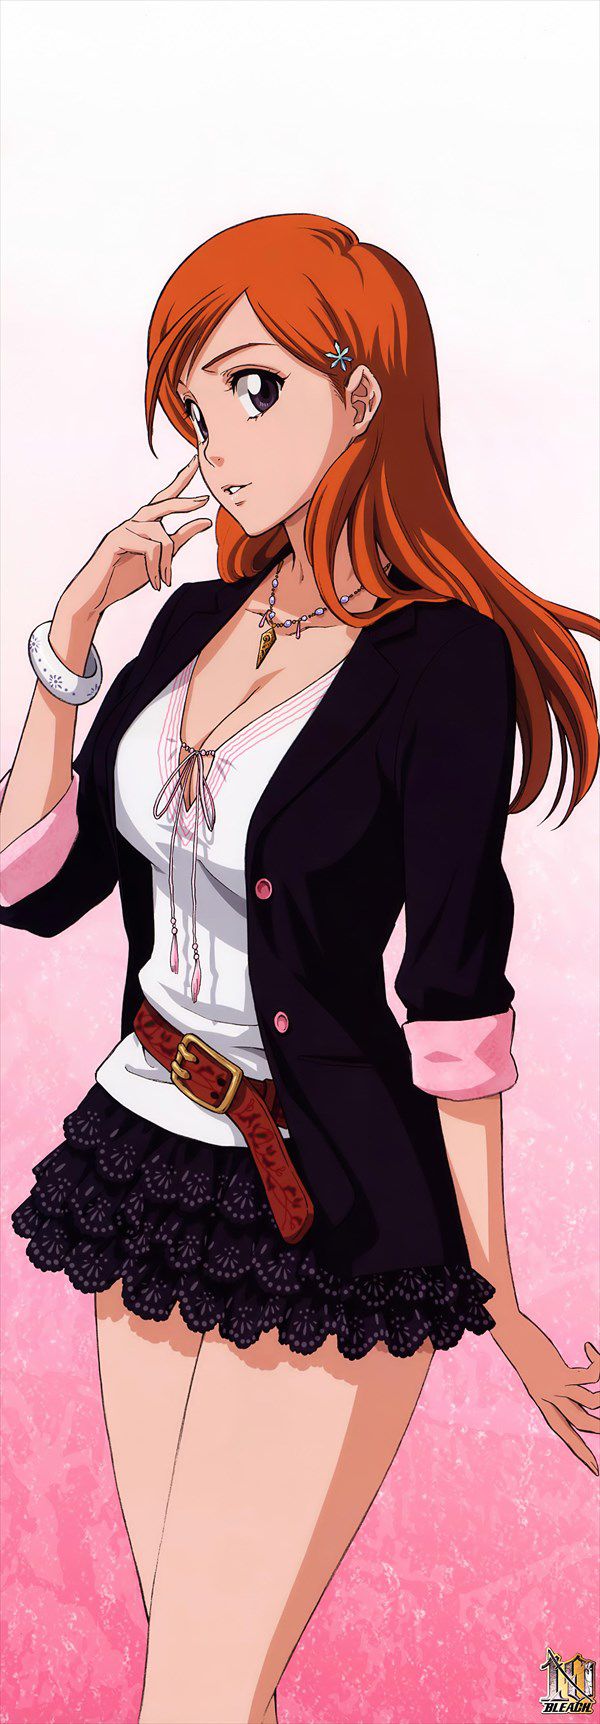 [BLEACH] Inoue Orihime hentai pictures Part1 6